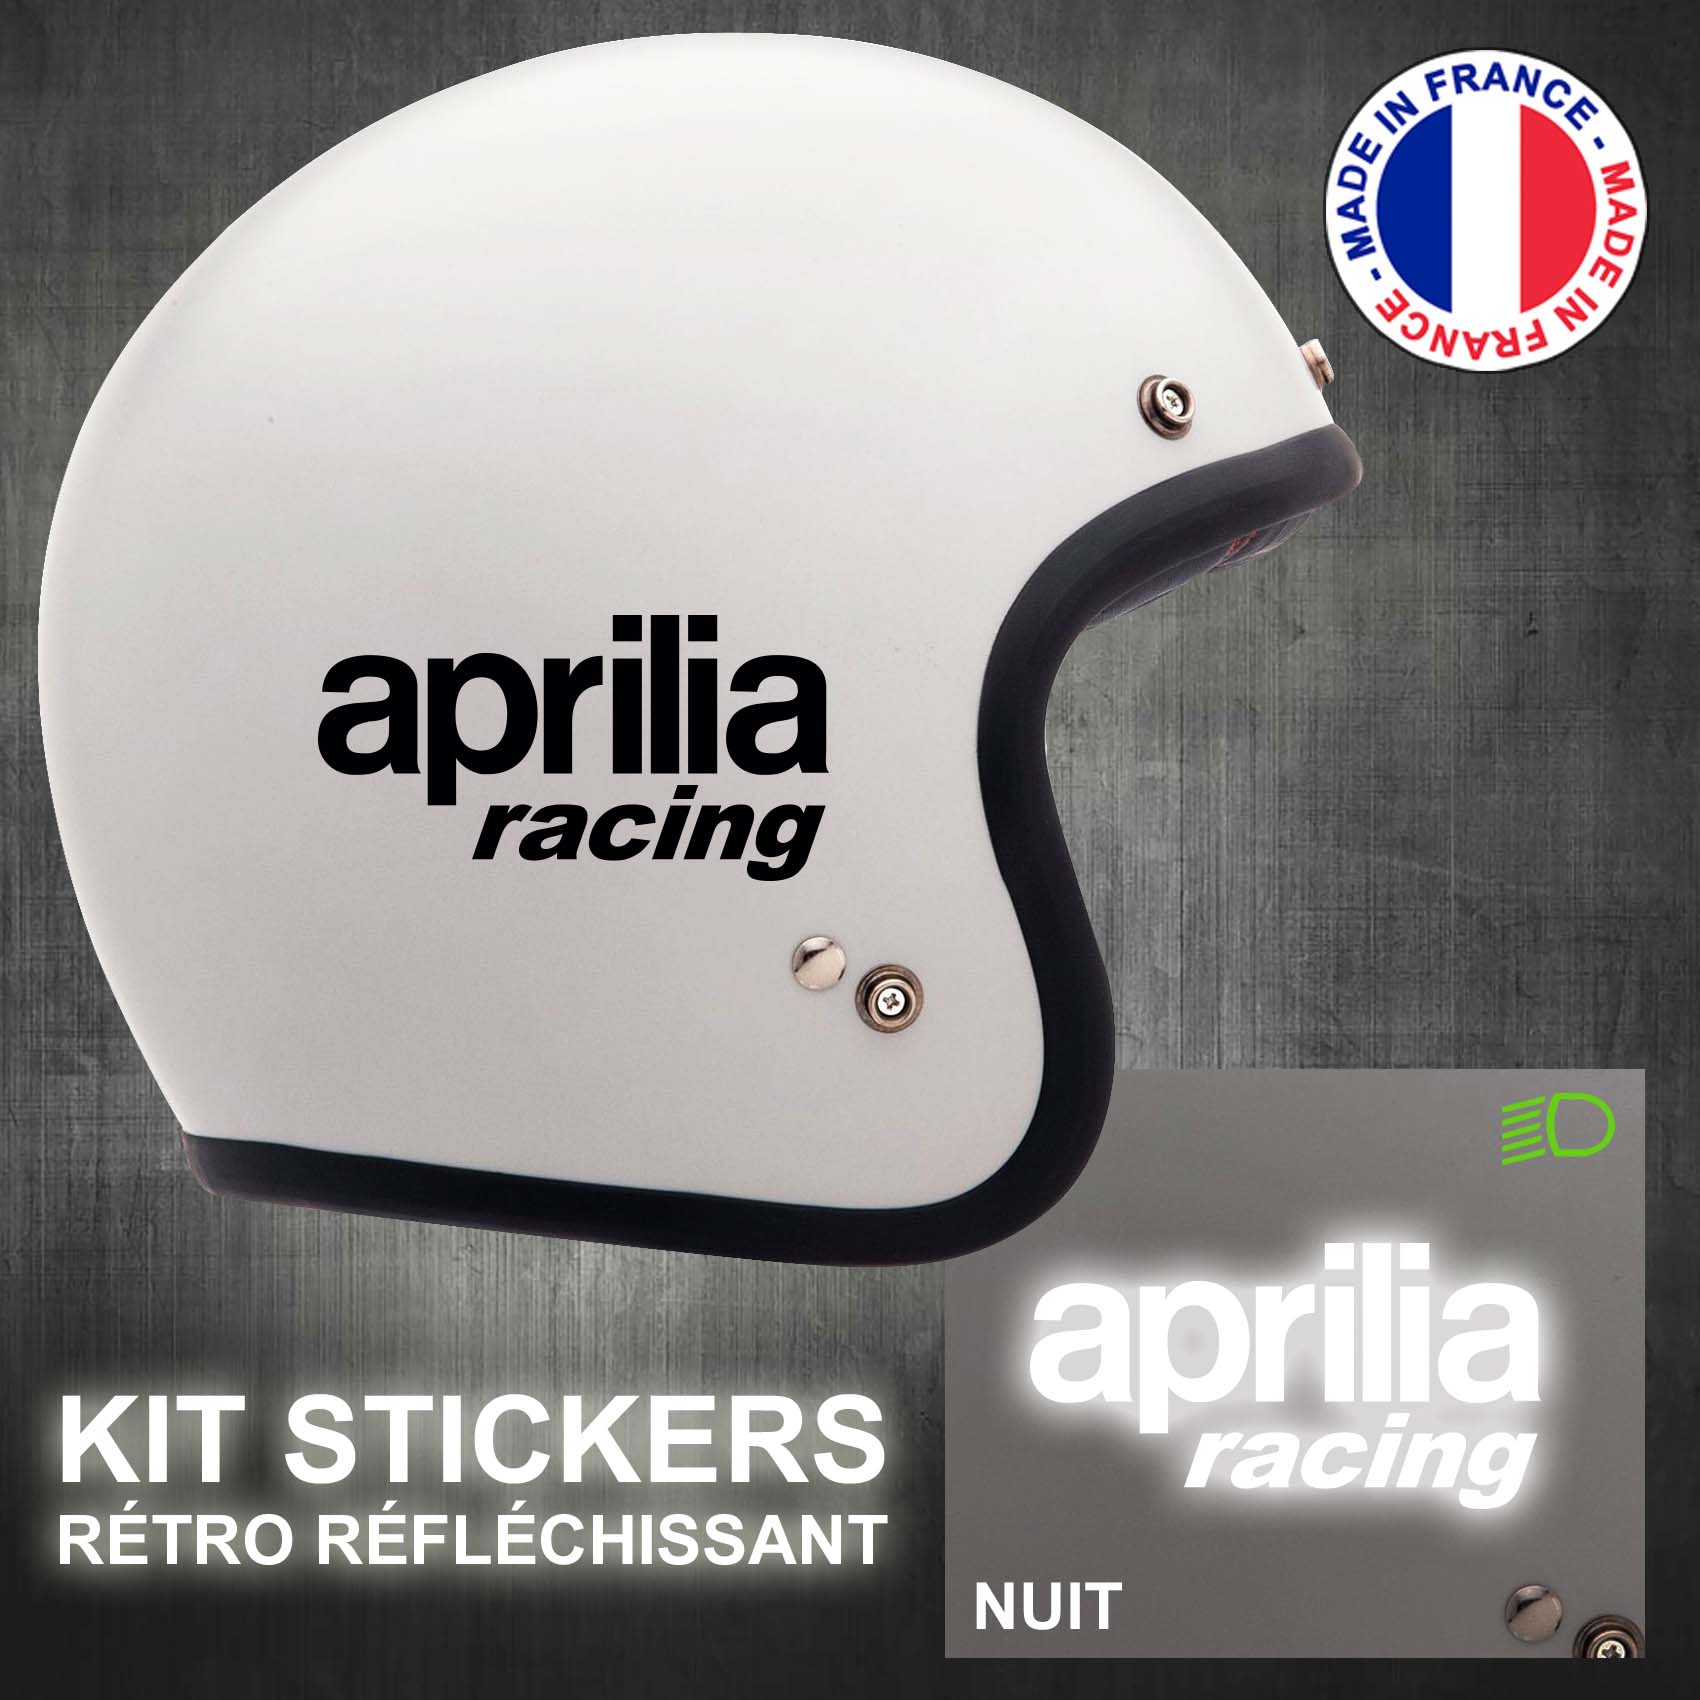 stickers-casque-moto-aprilia-racing-ref3-retro-reflechissant-autocollant-blanc-moto-velo-tuning-racing-route-sticker-casques-adhesif-scooter-nuit-securite-decals-personnalise-personnalisable-min